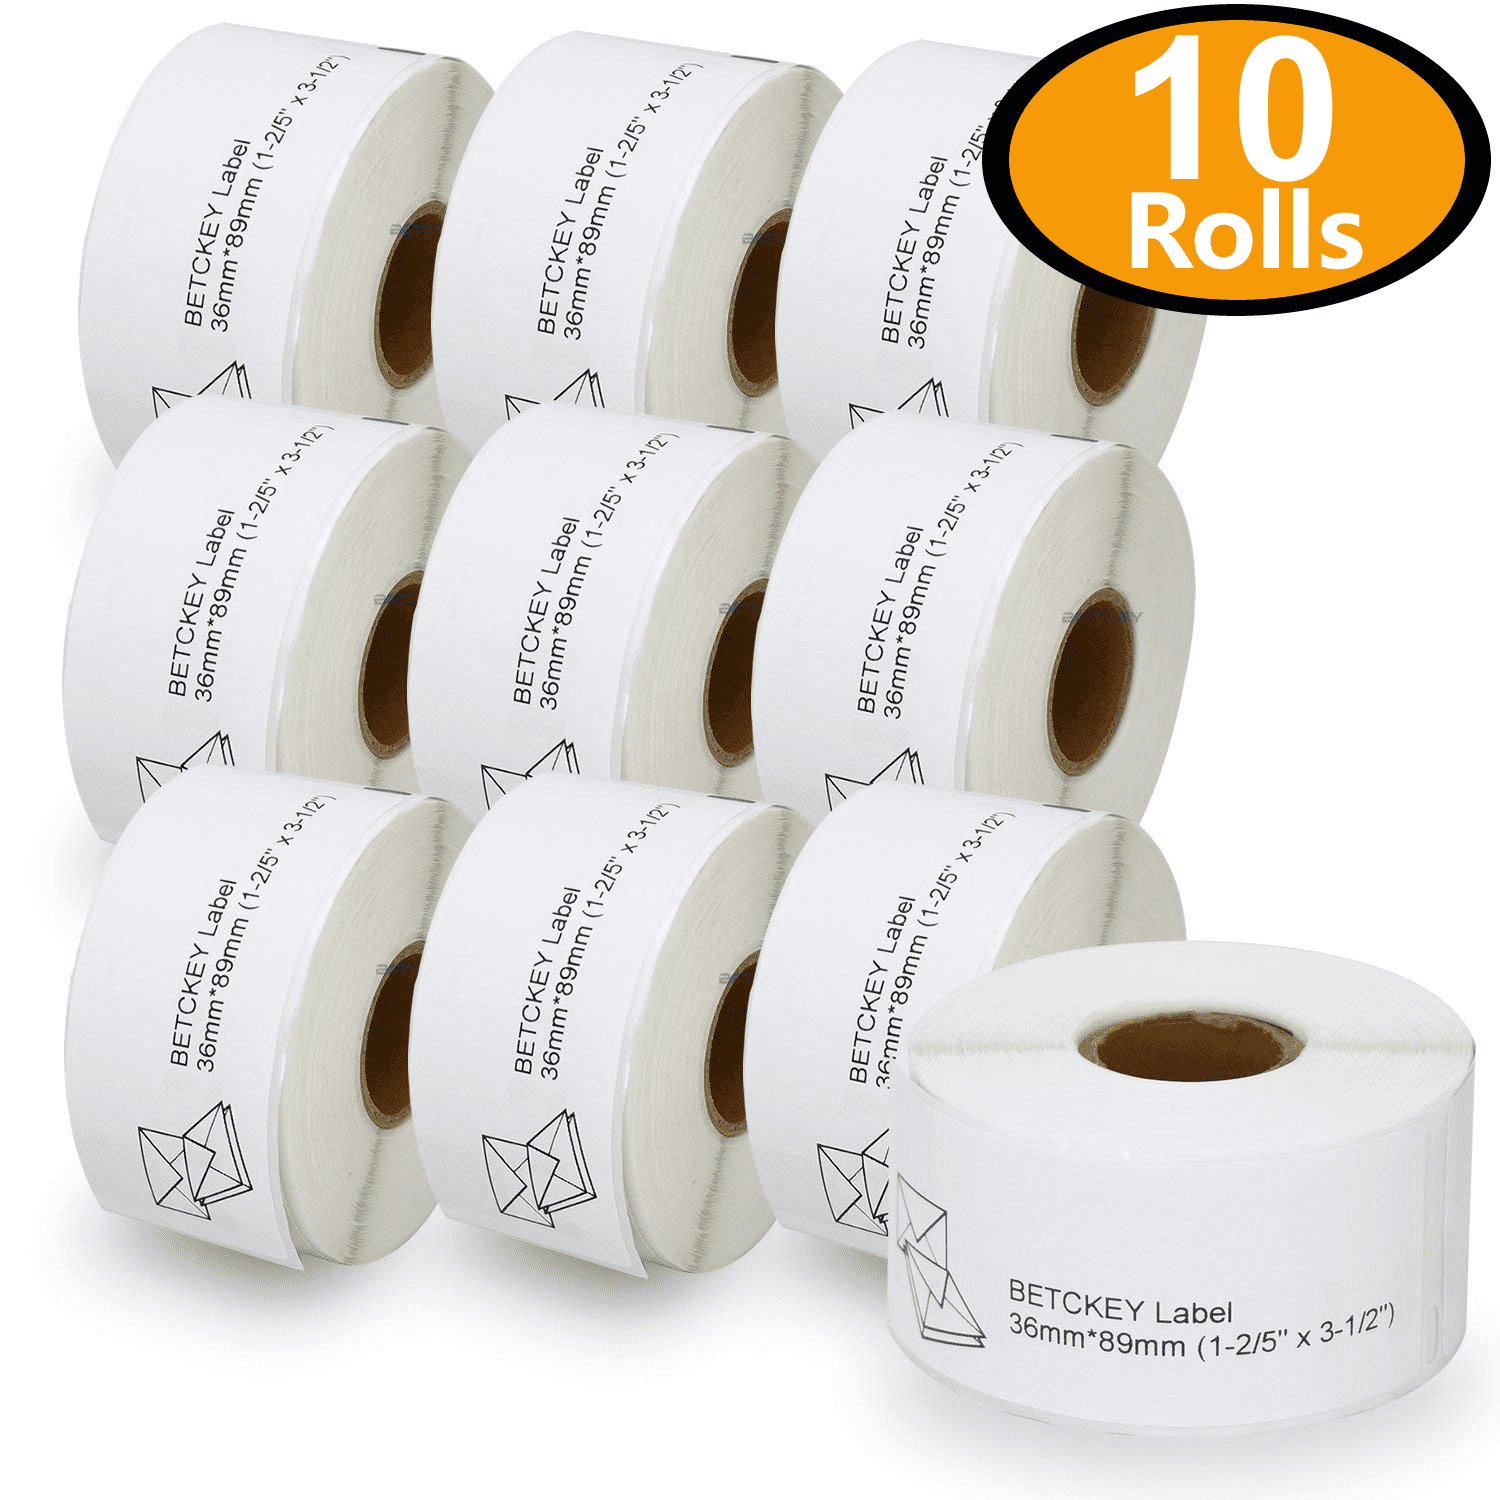 2 Rolls/520 Labels Large Address Labels Compatible DYMO 30321 1-4/10 x 3-1/2 BETCKEY DYMO Labelwriter 450 Compatible with Rollo 4XL & Zebra Desktop Printers